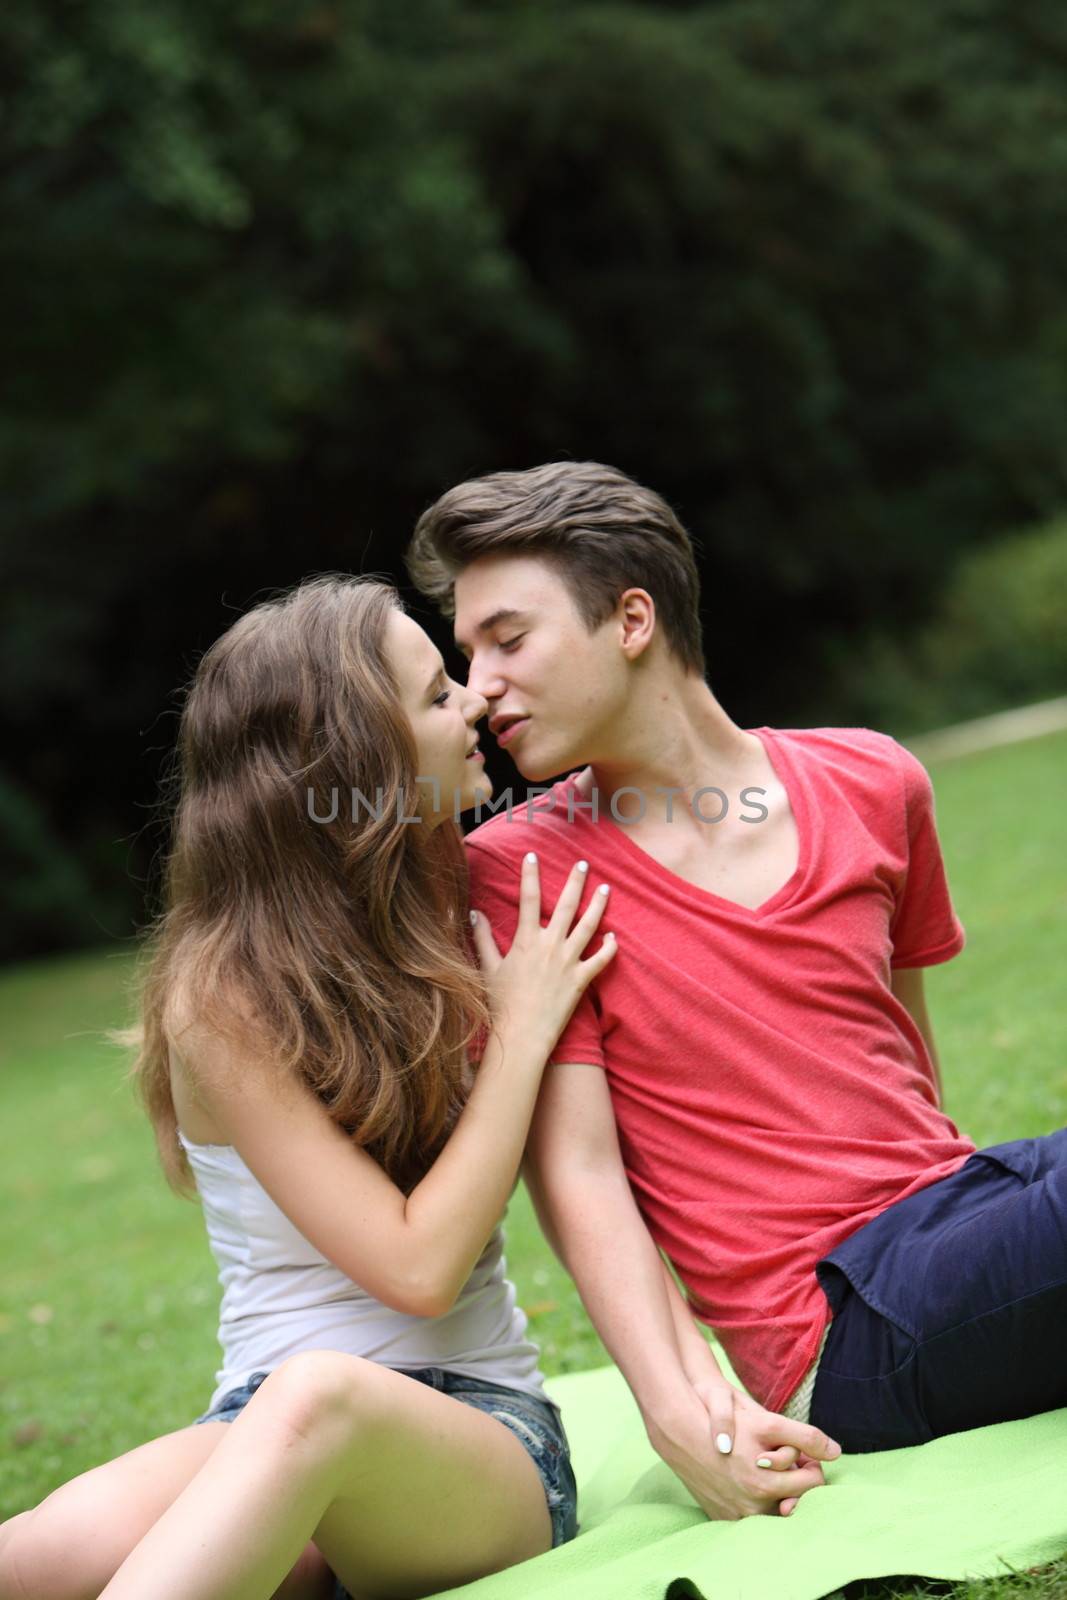 Romantic attractive young teenage couple sitting on a rug on the grass in a park kissing